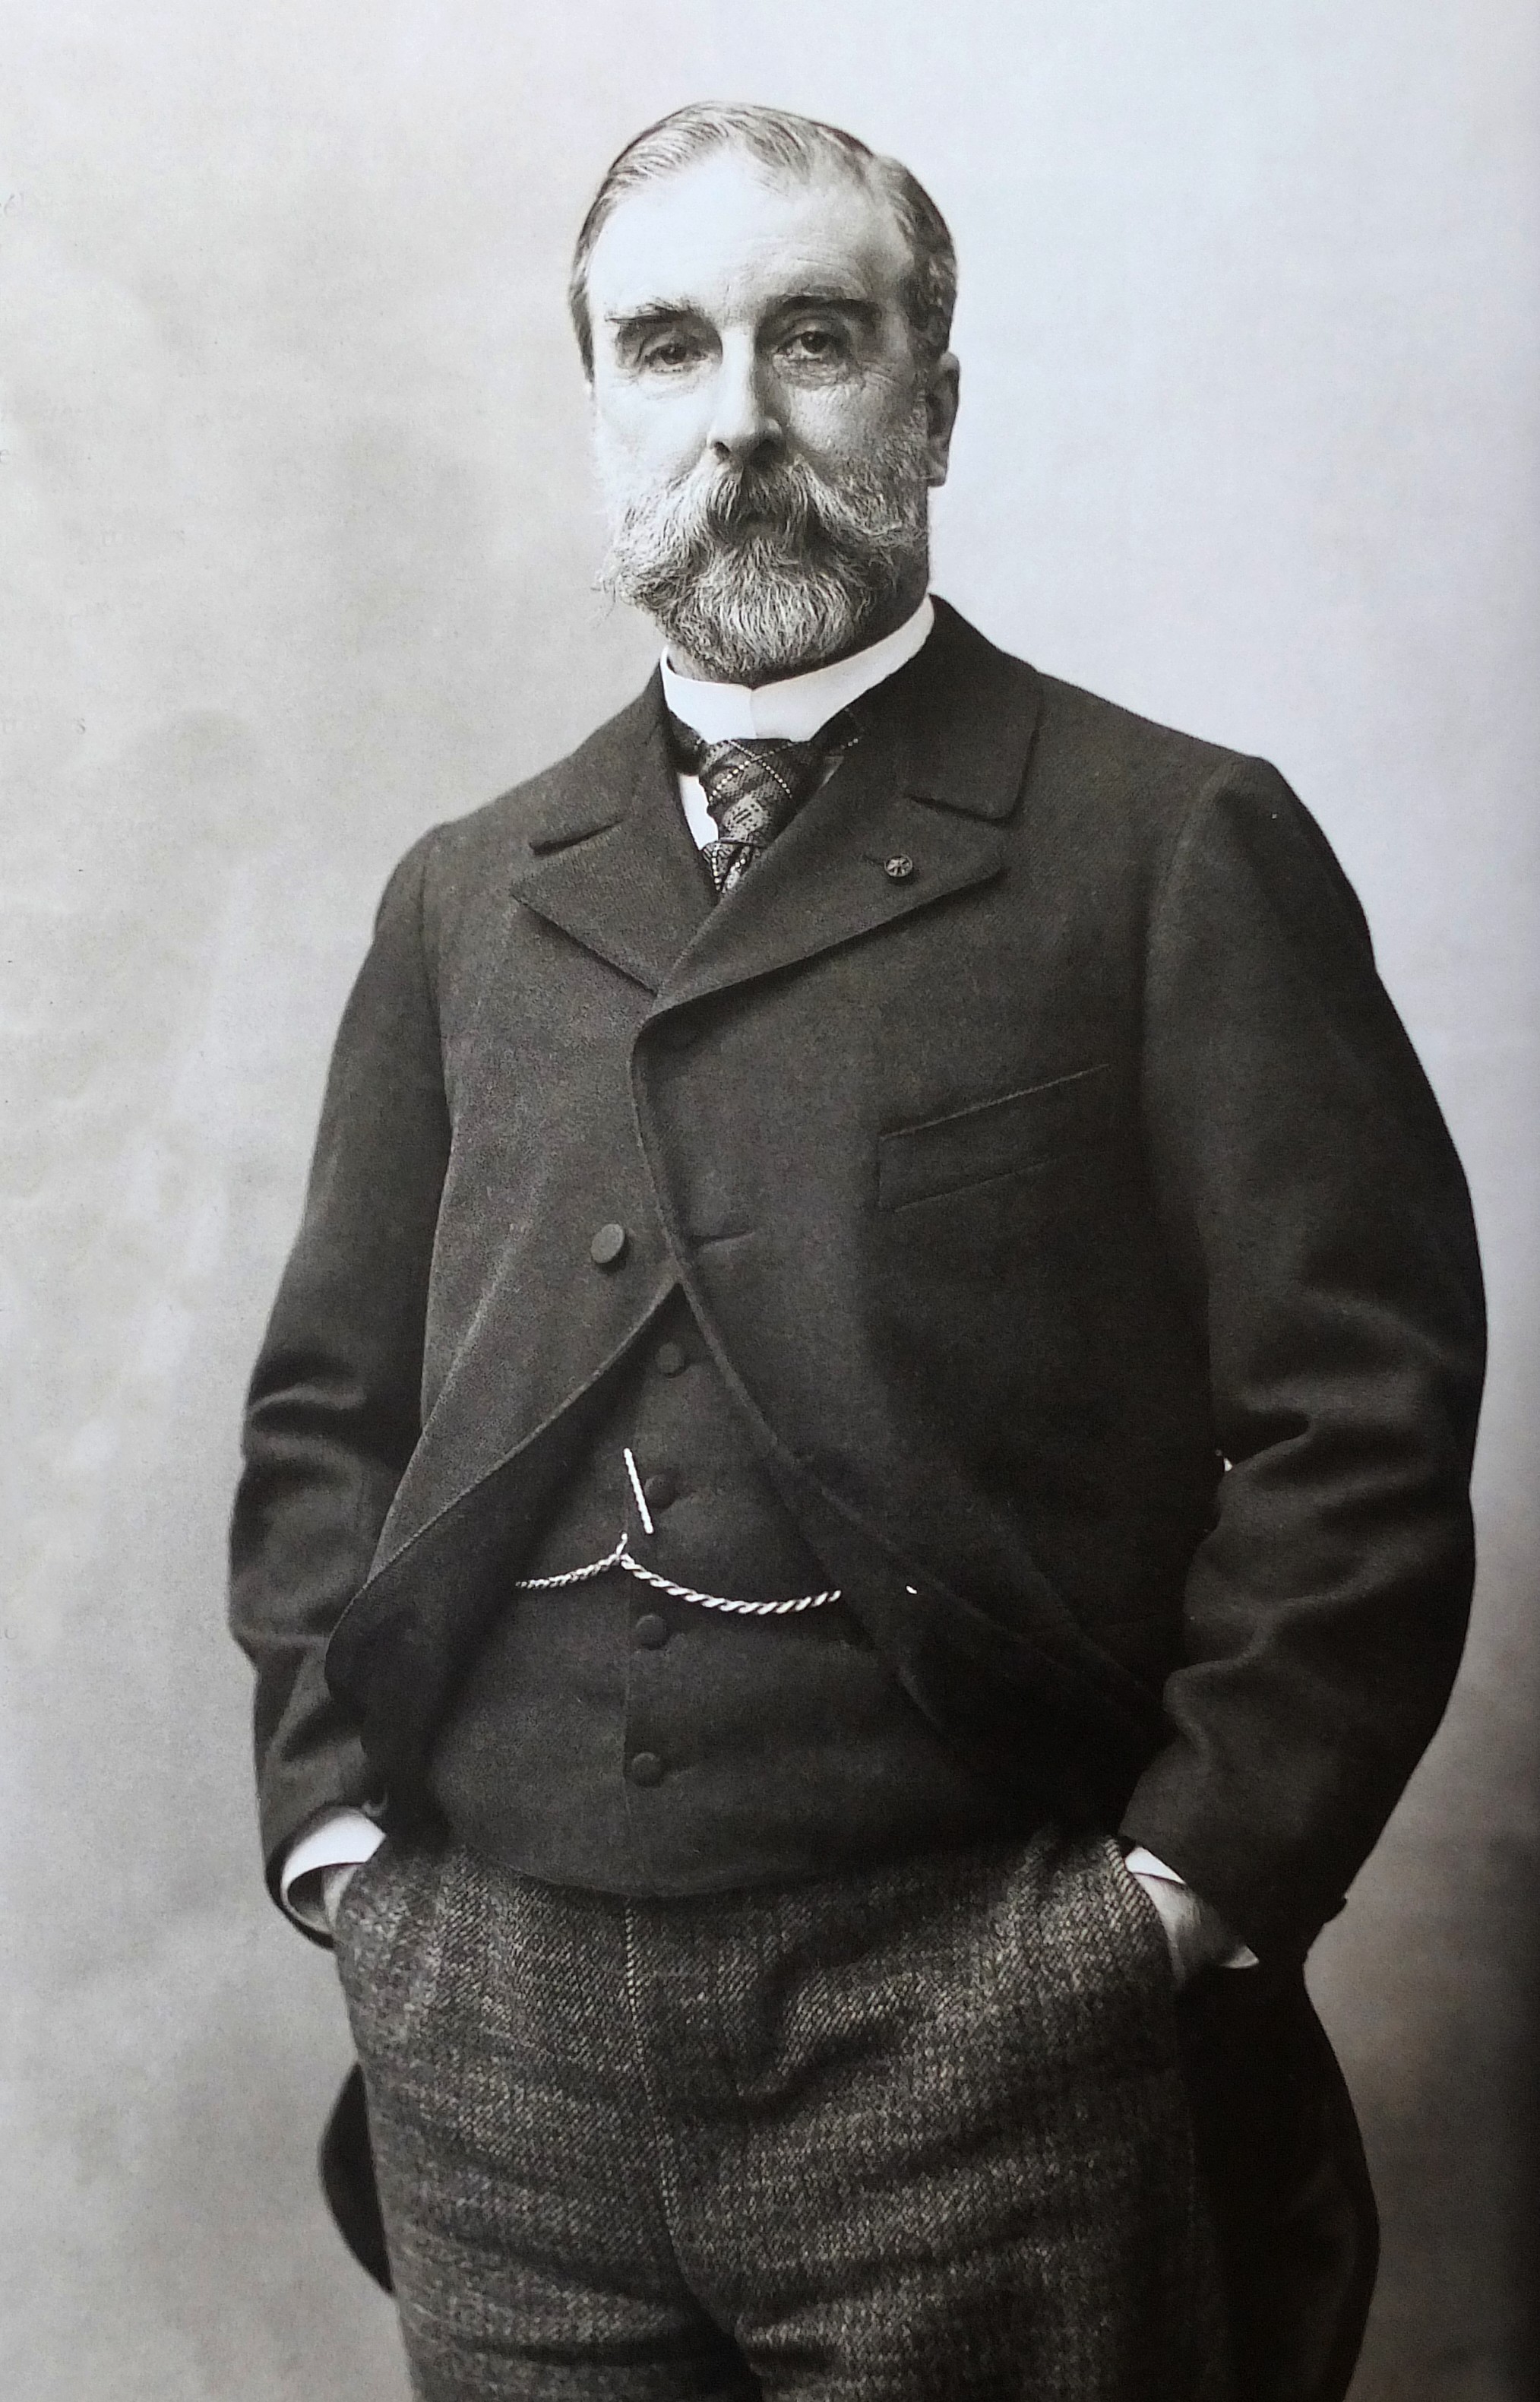 Ludovic_Halévy_1896.jpg picture